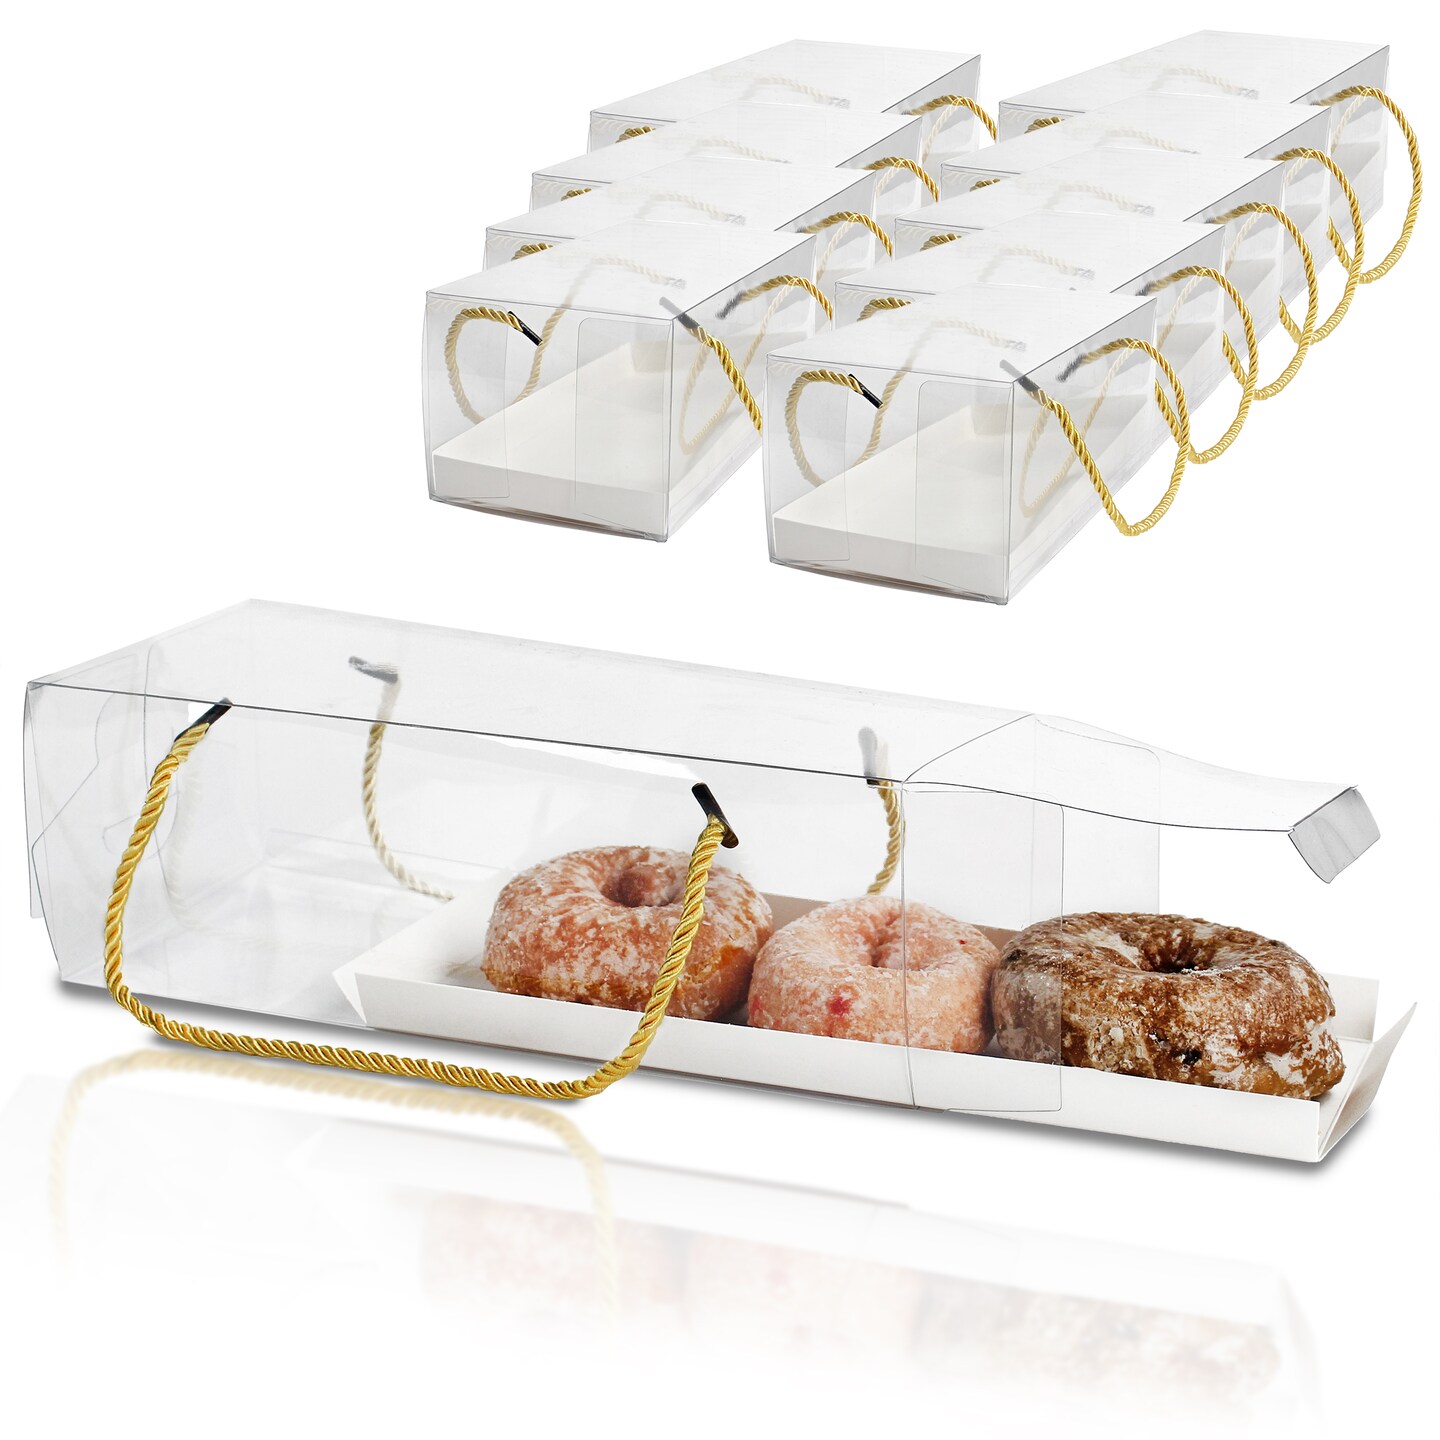 Spec101 Clear Dessert Boxes with Handles 10pk - 10.8x4.3x3.7in Small Cake Boxes